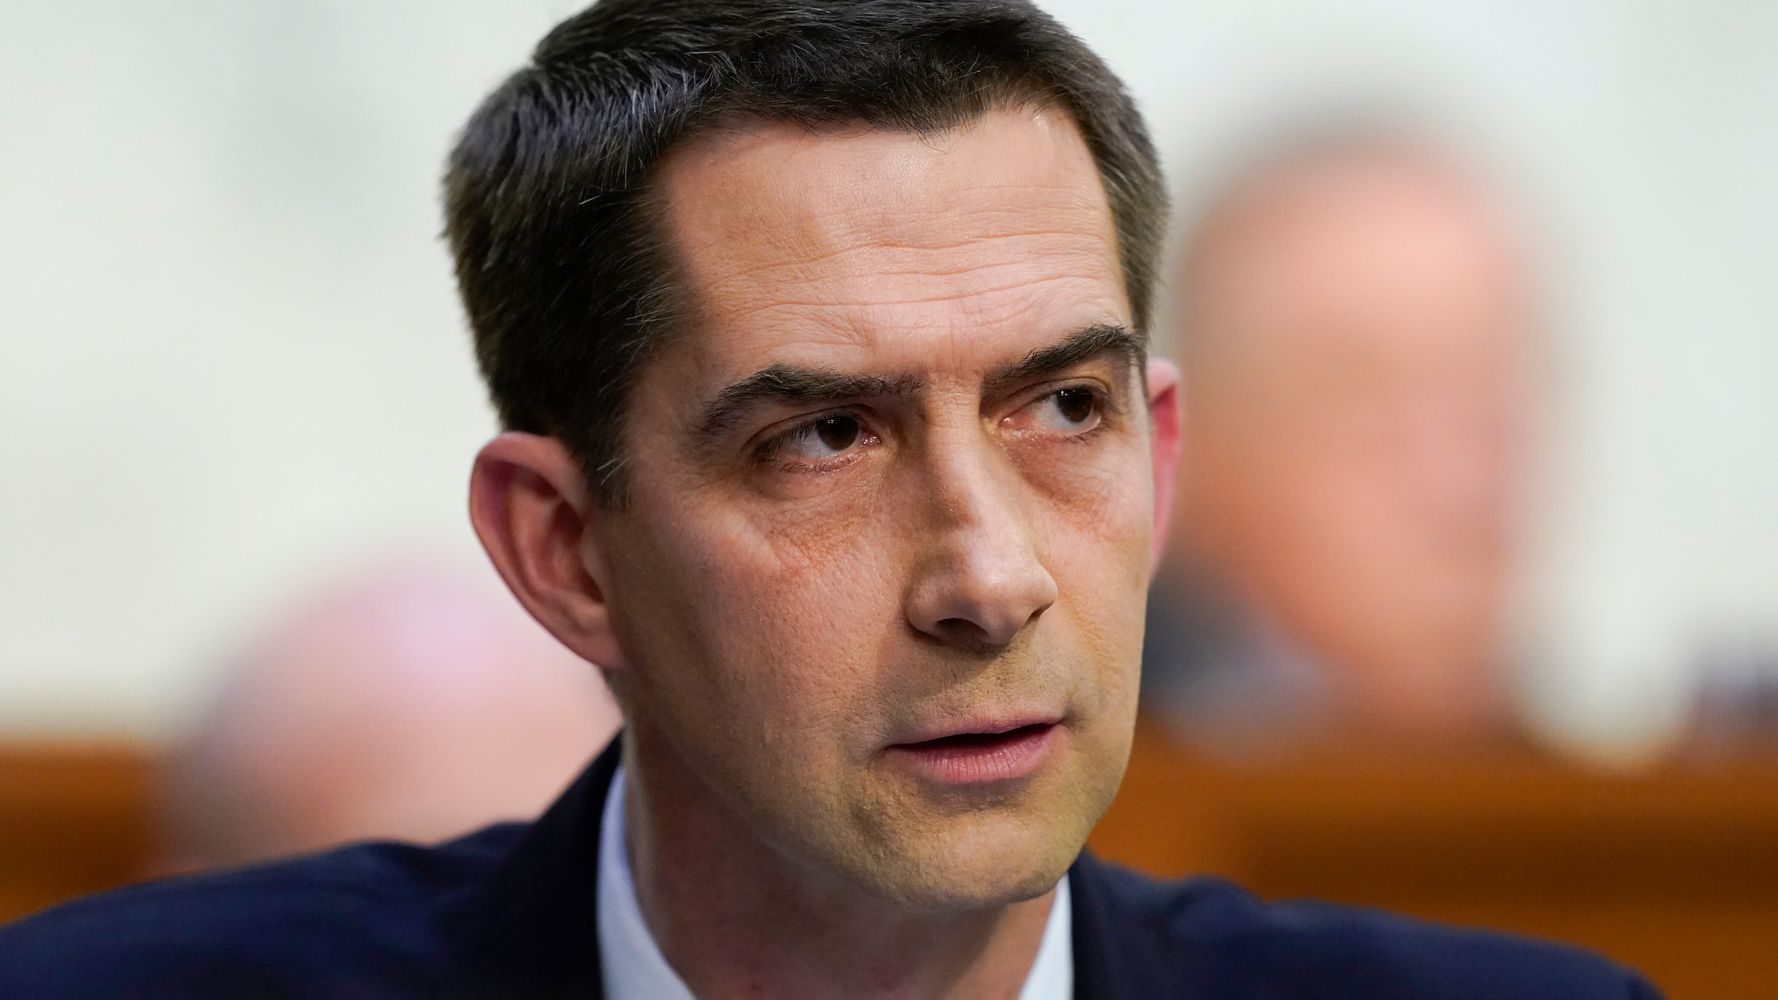 Twitter Users Think Sen. Tom Cotton's Vision Of A Dystopian America Sounds Wonderful